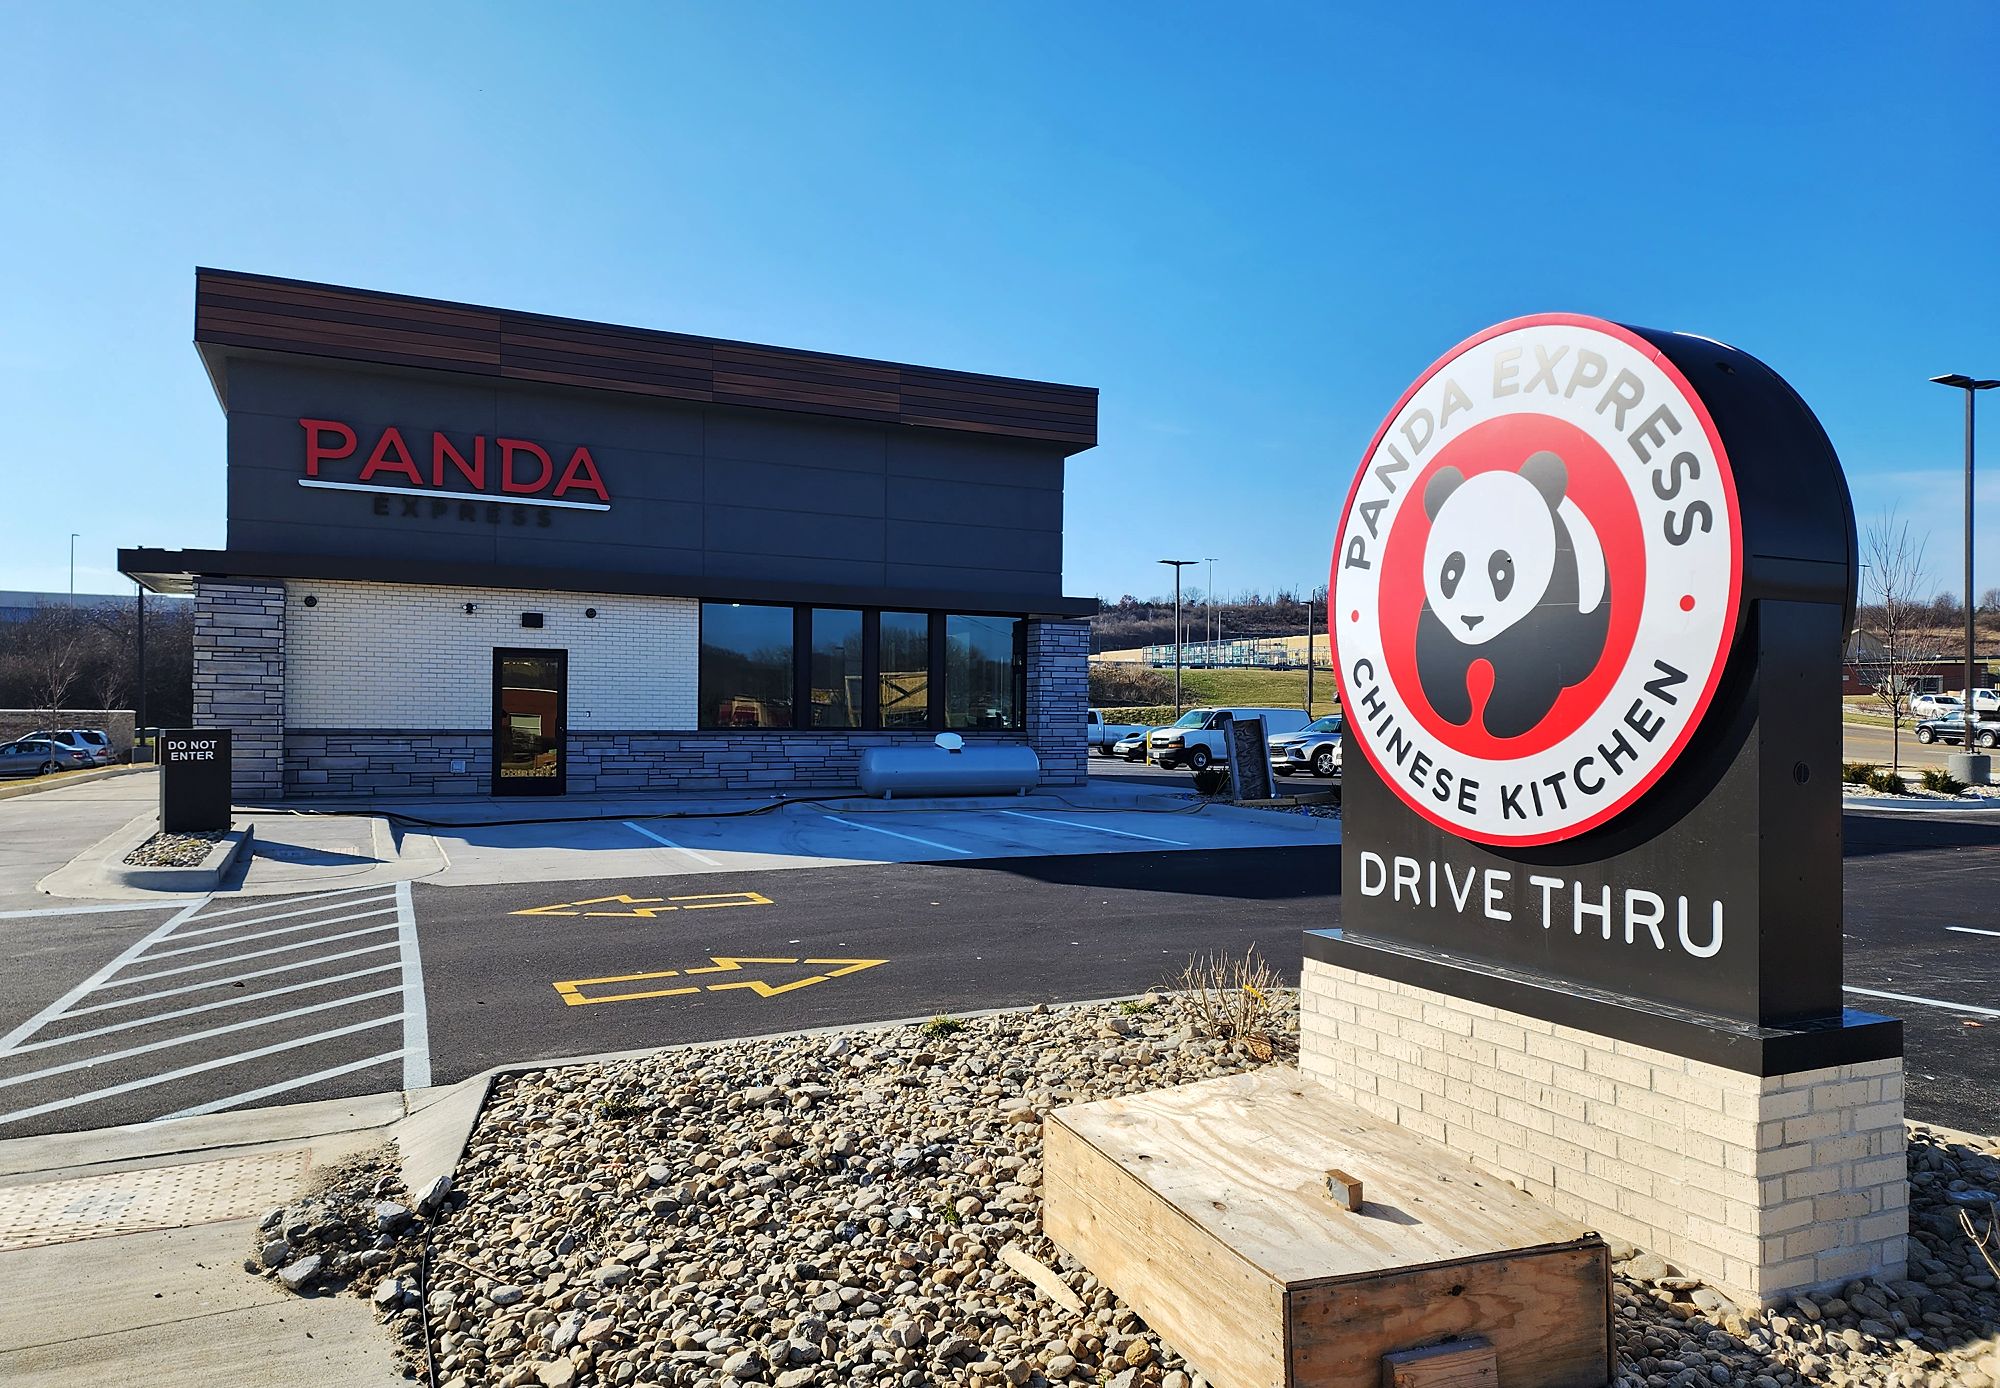 TODAY: Eat at Panda Express and support Hamilton's Boys & Girls Club